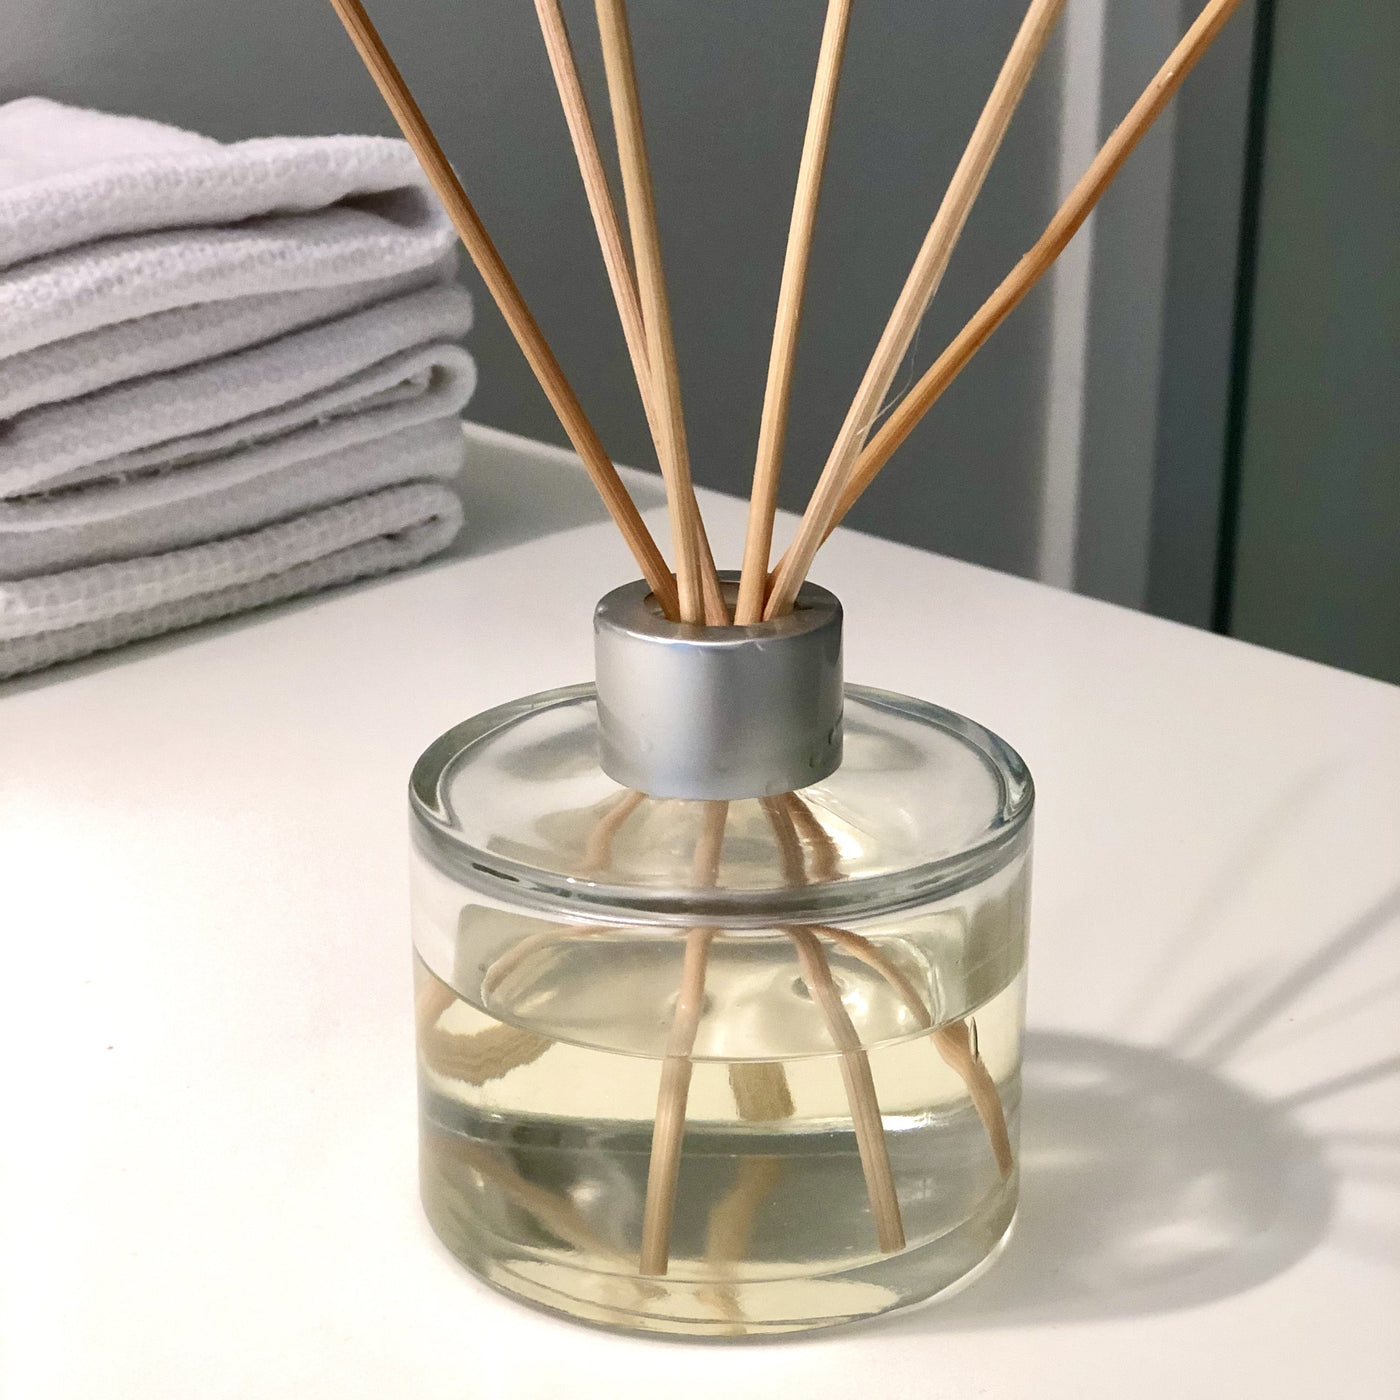 Lavender Reed Diffuser - Roses & Chains | Fashionable Clothing, Shoes, Accessories, & More